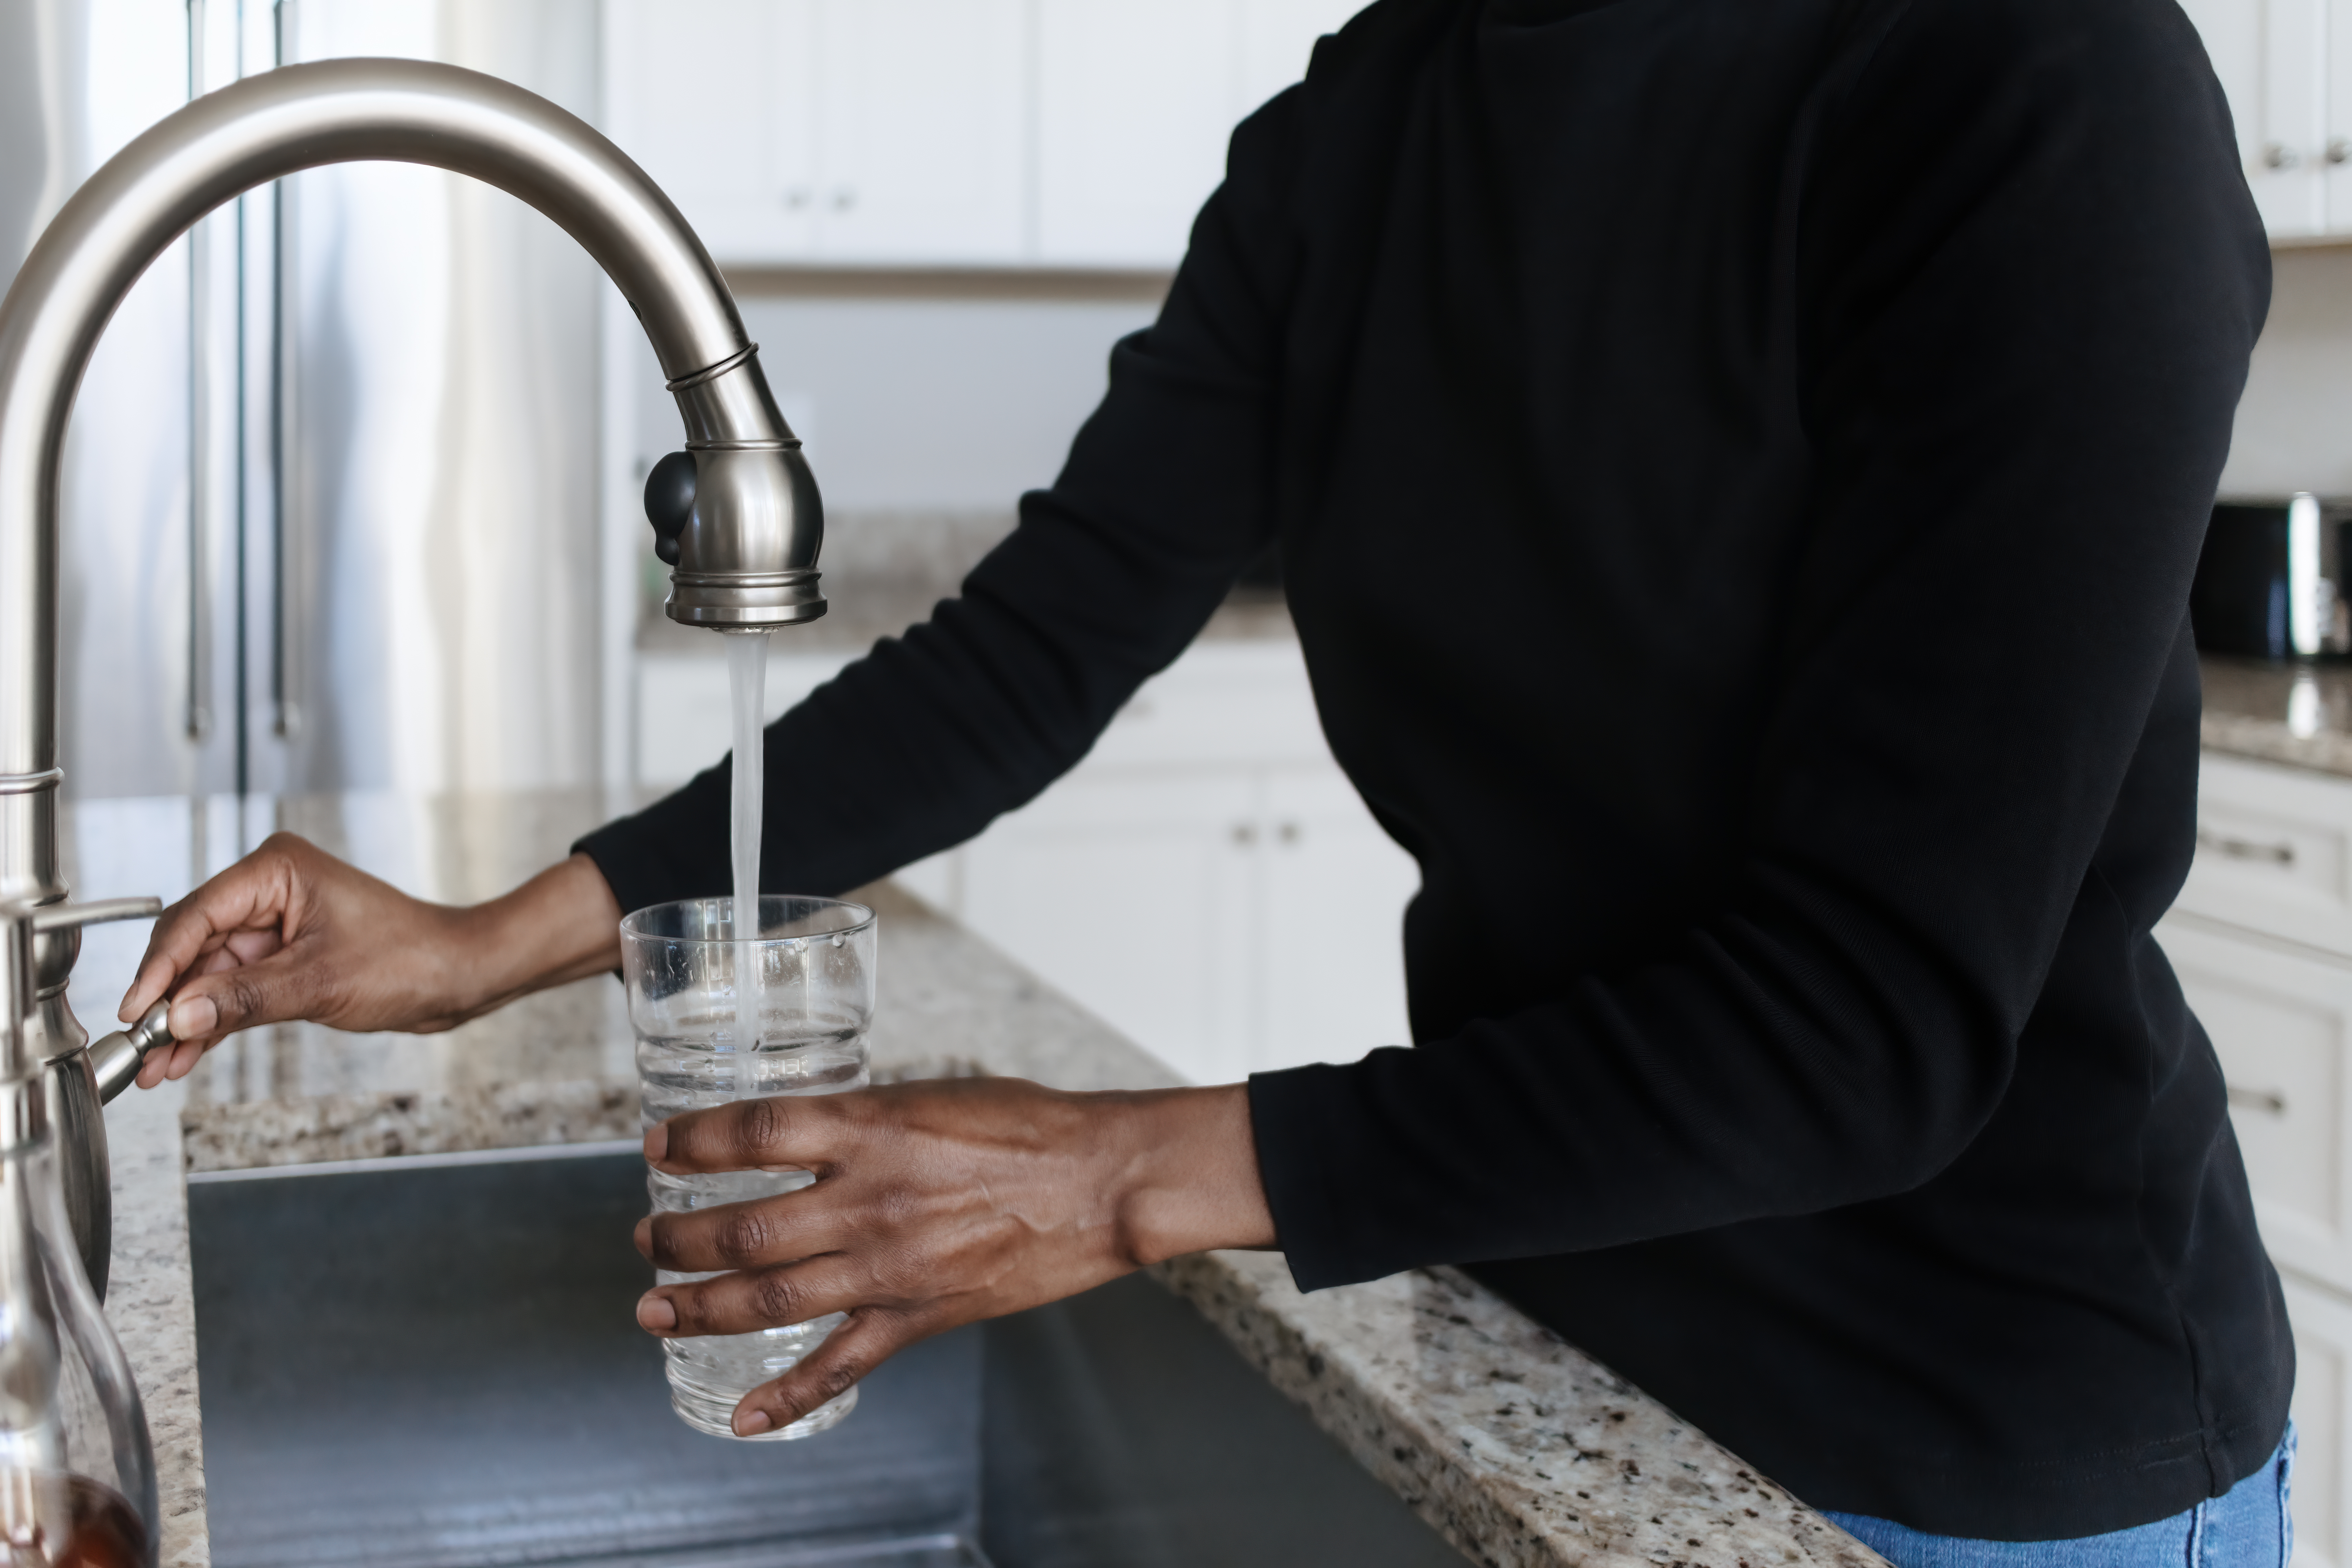 A person fills a water glass from a kitchen sink.